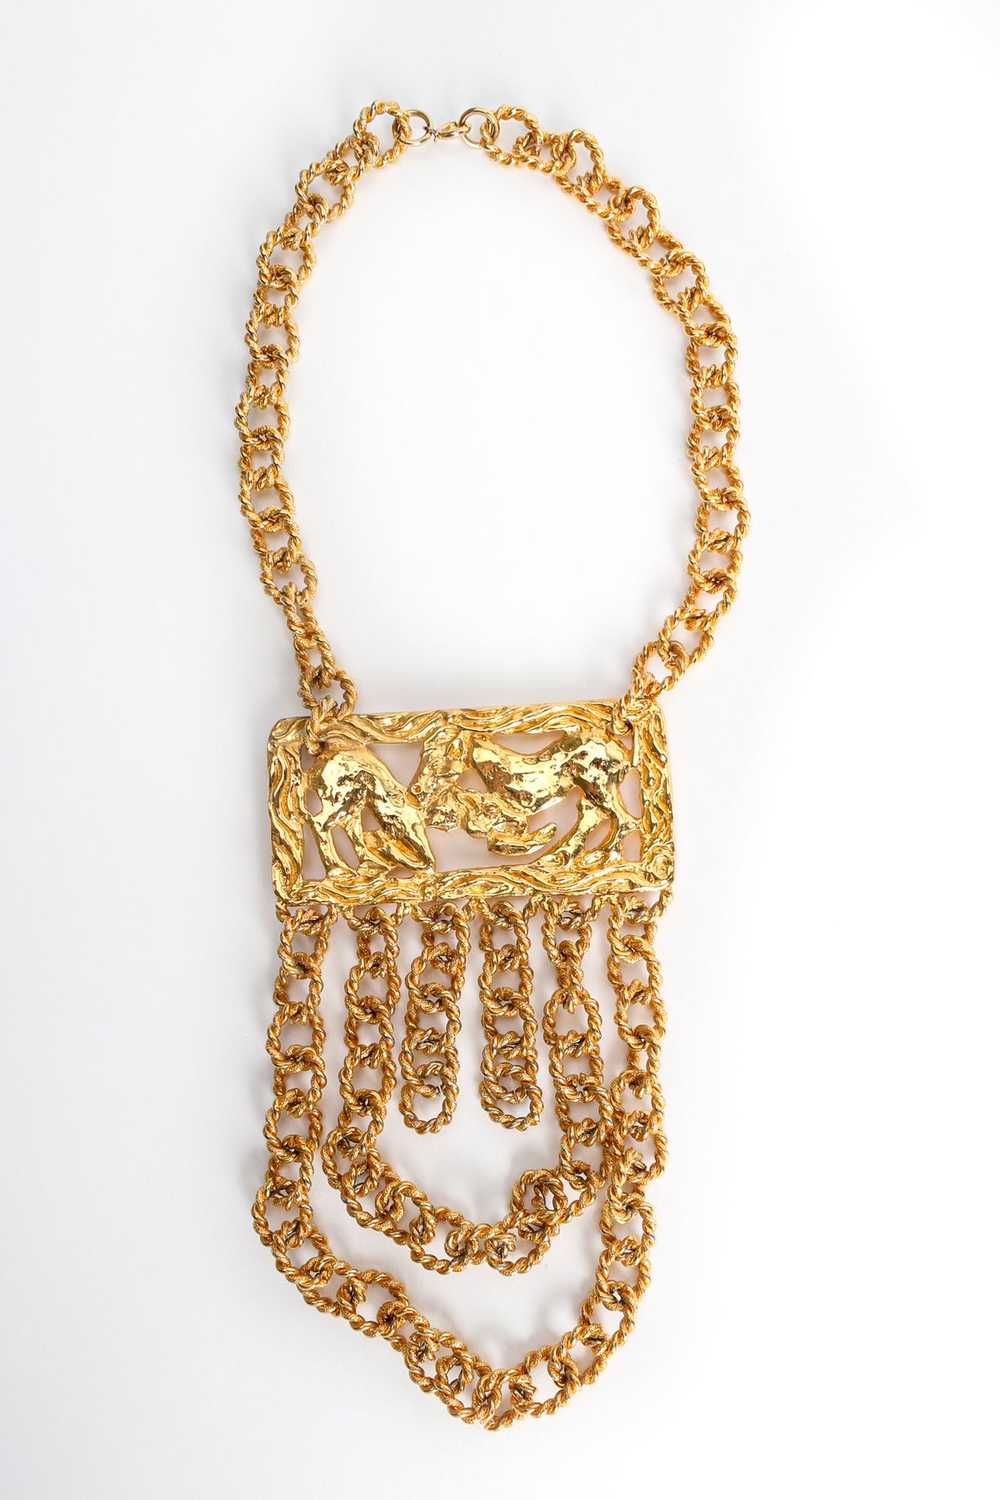 Golden Horse Pendant Rope Chain Necklace - image 3